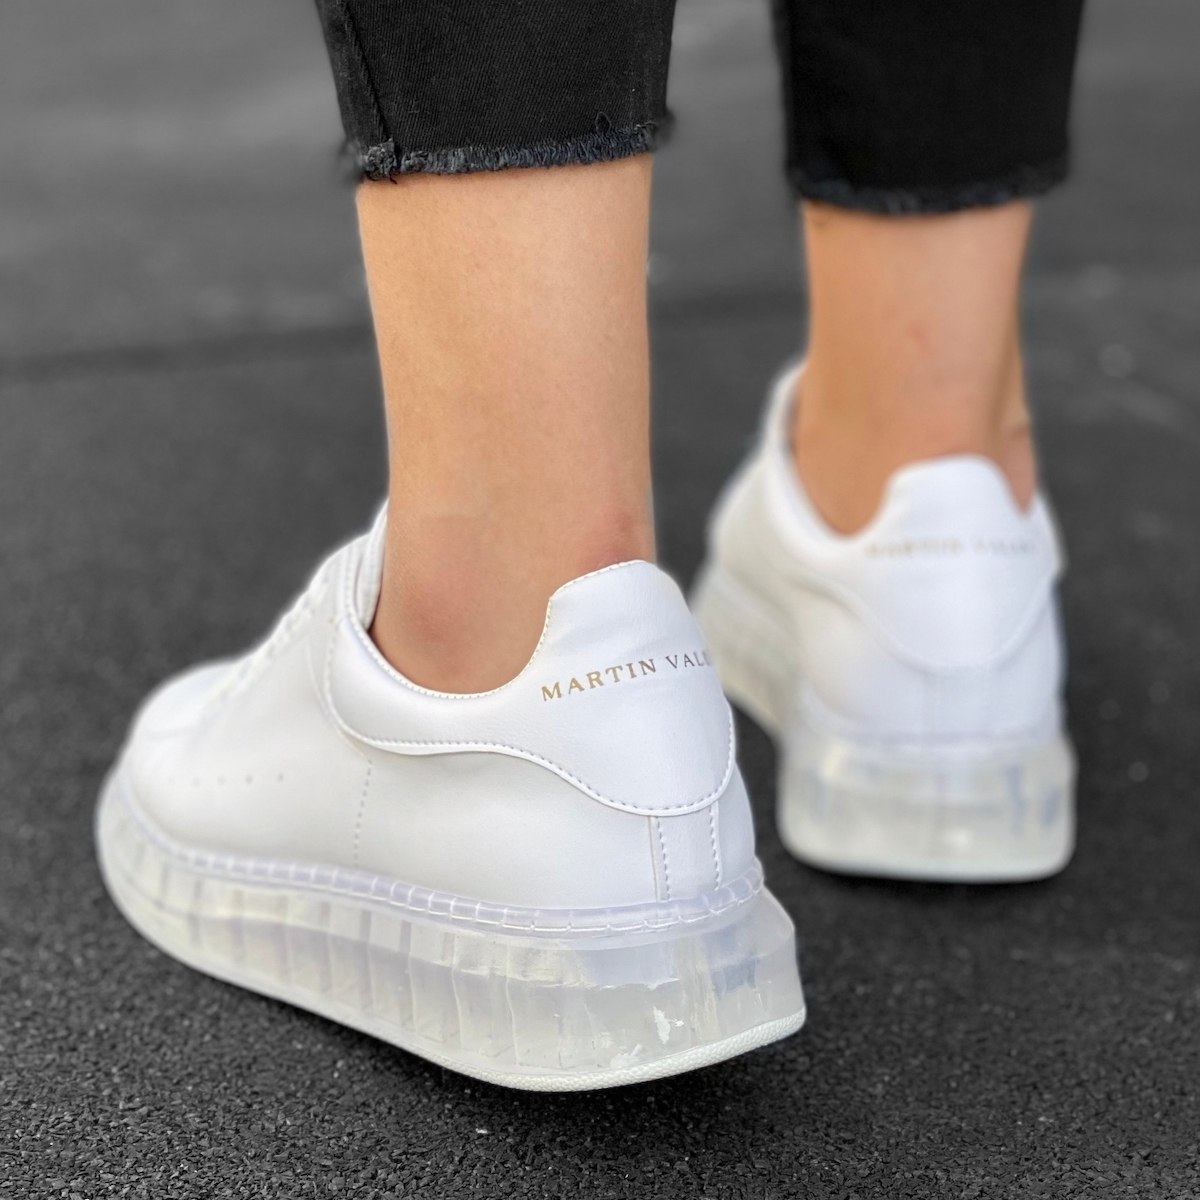 Details more than 179 sneakers with transparent soles super hot